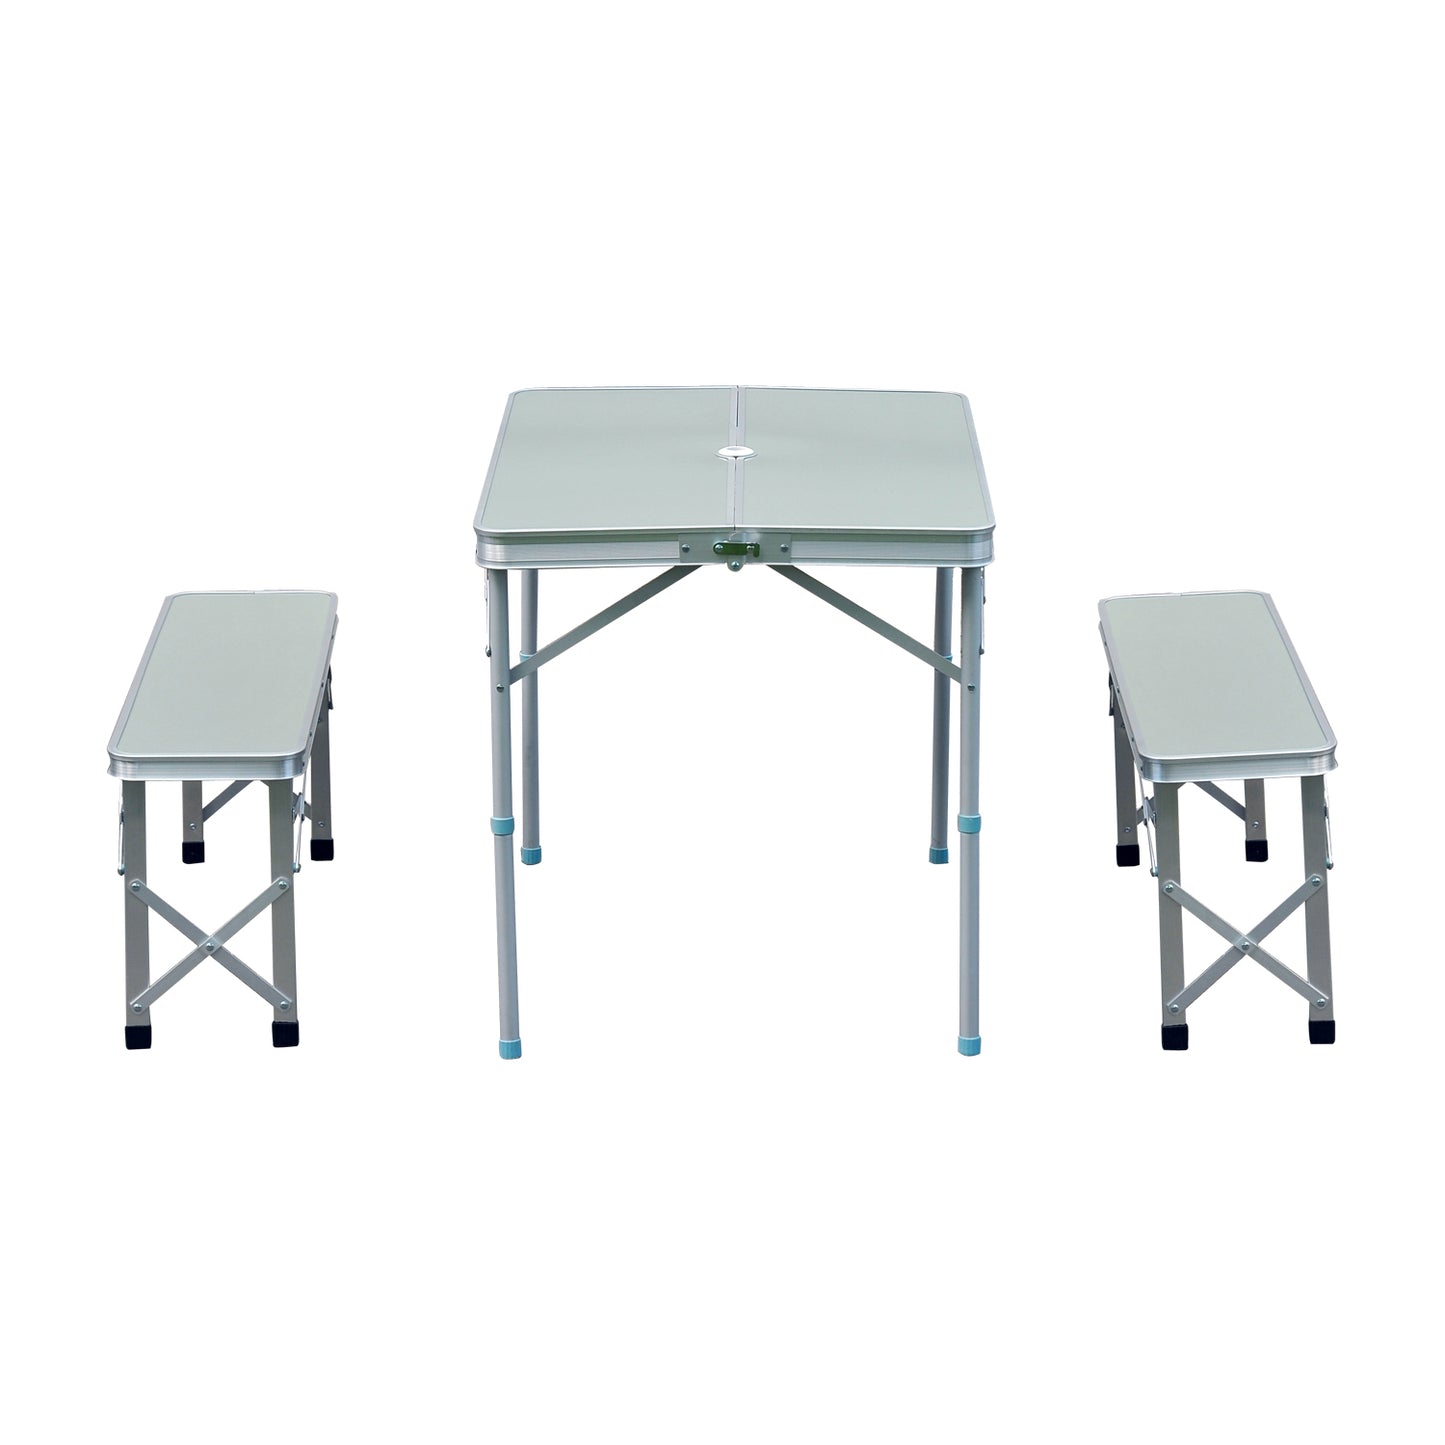 Outsunny 3 Pcs Portable Outdoor Picnic Table with Folding Bench Seats-Silver